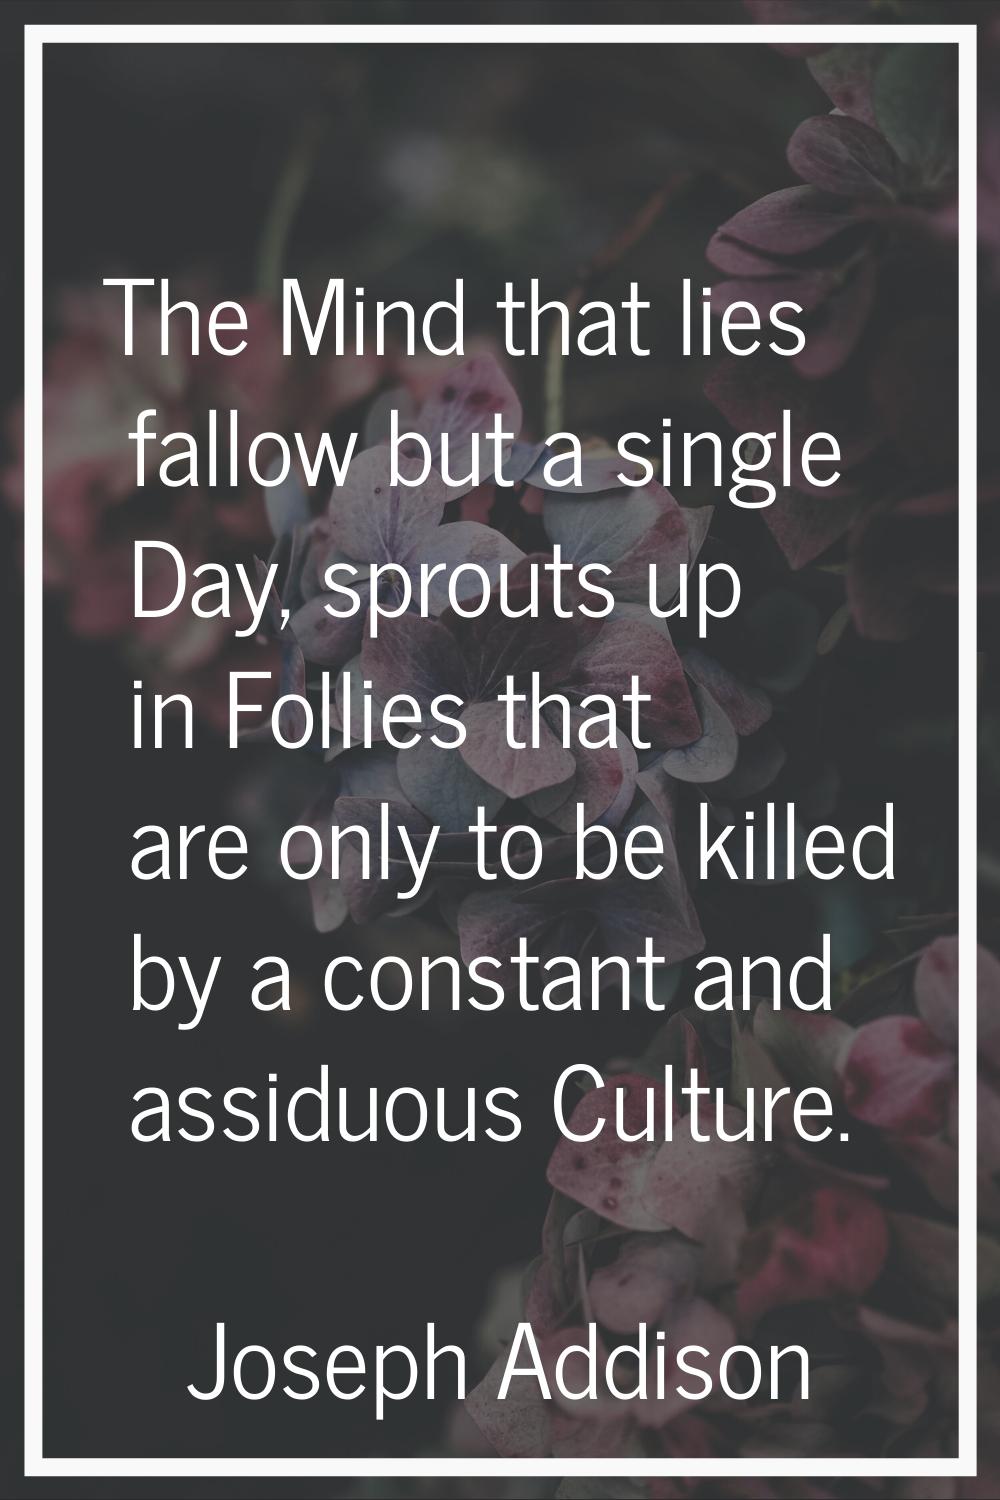 The Mind that lies fallow but a single Day, sprouts up in Follies that are only to be killed by a c